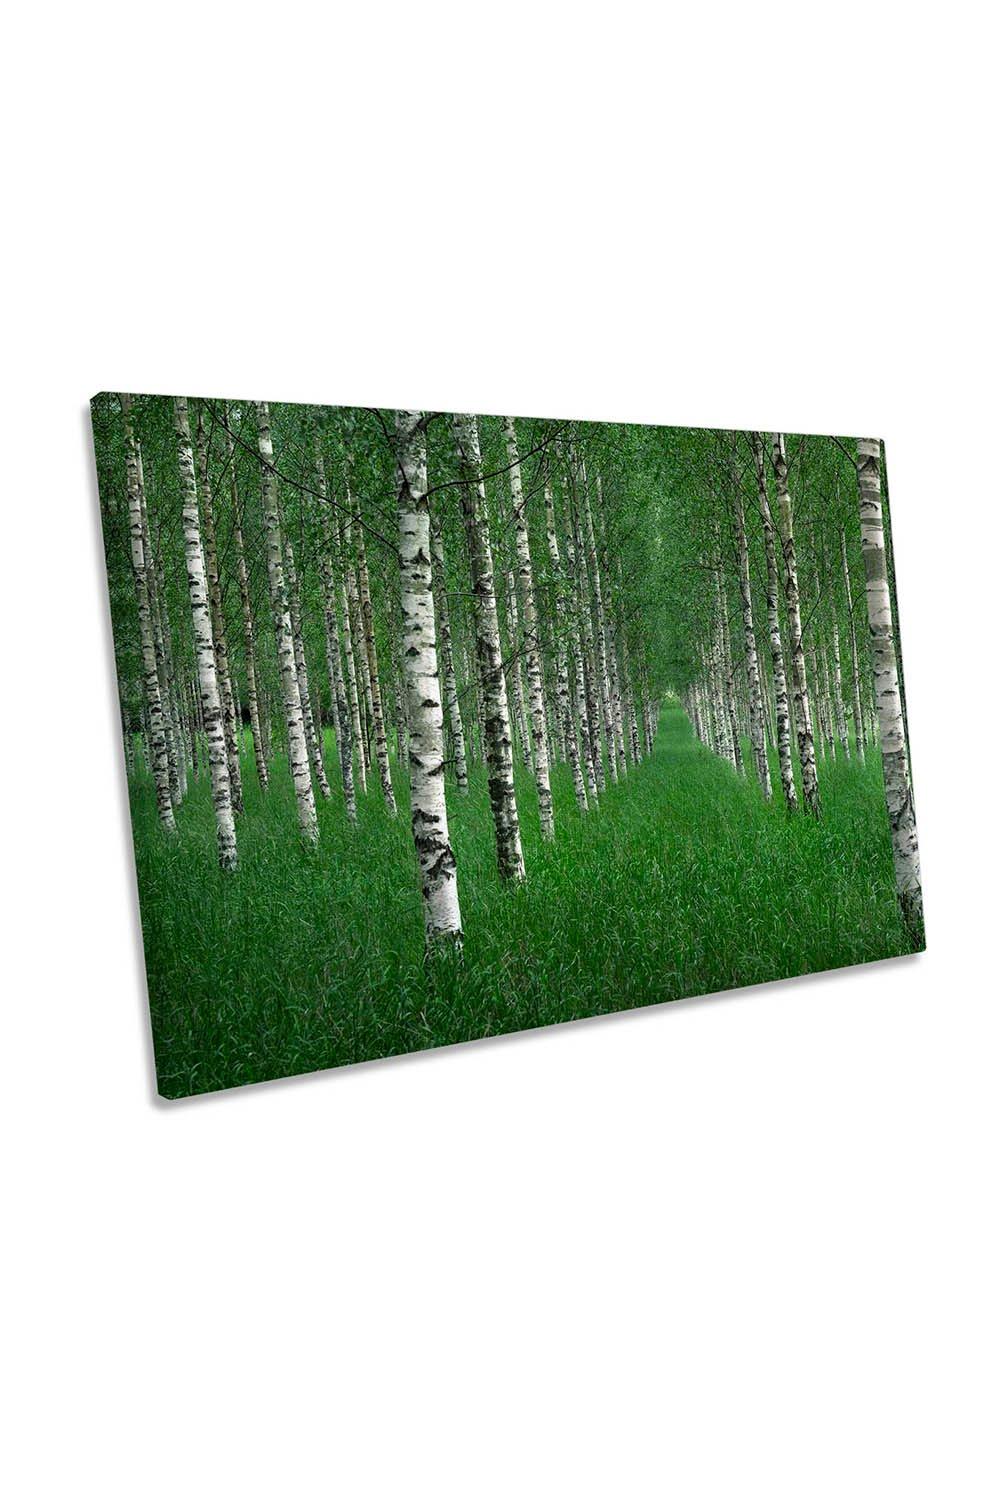 The Tunnel Birch Trees Green Forest Canvas Wall Art Picture Print